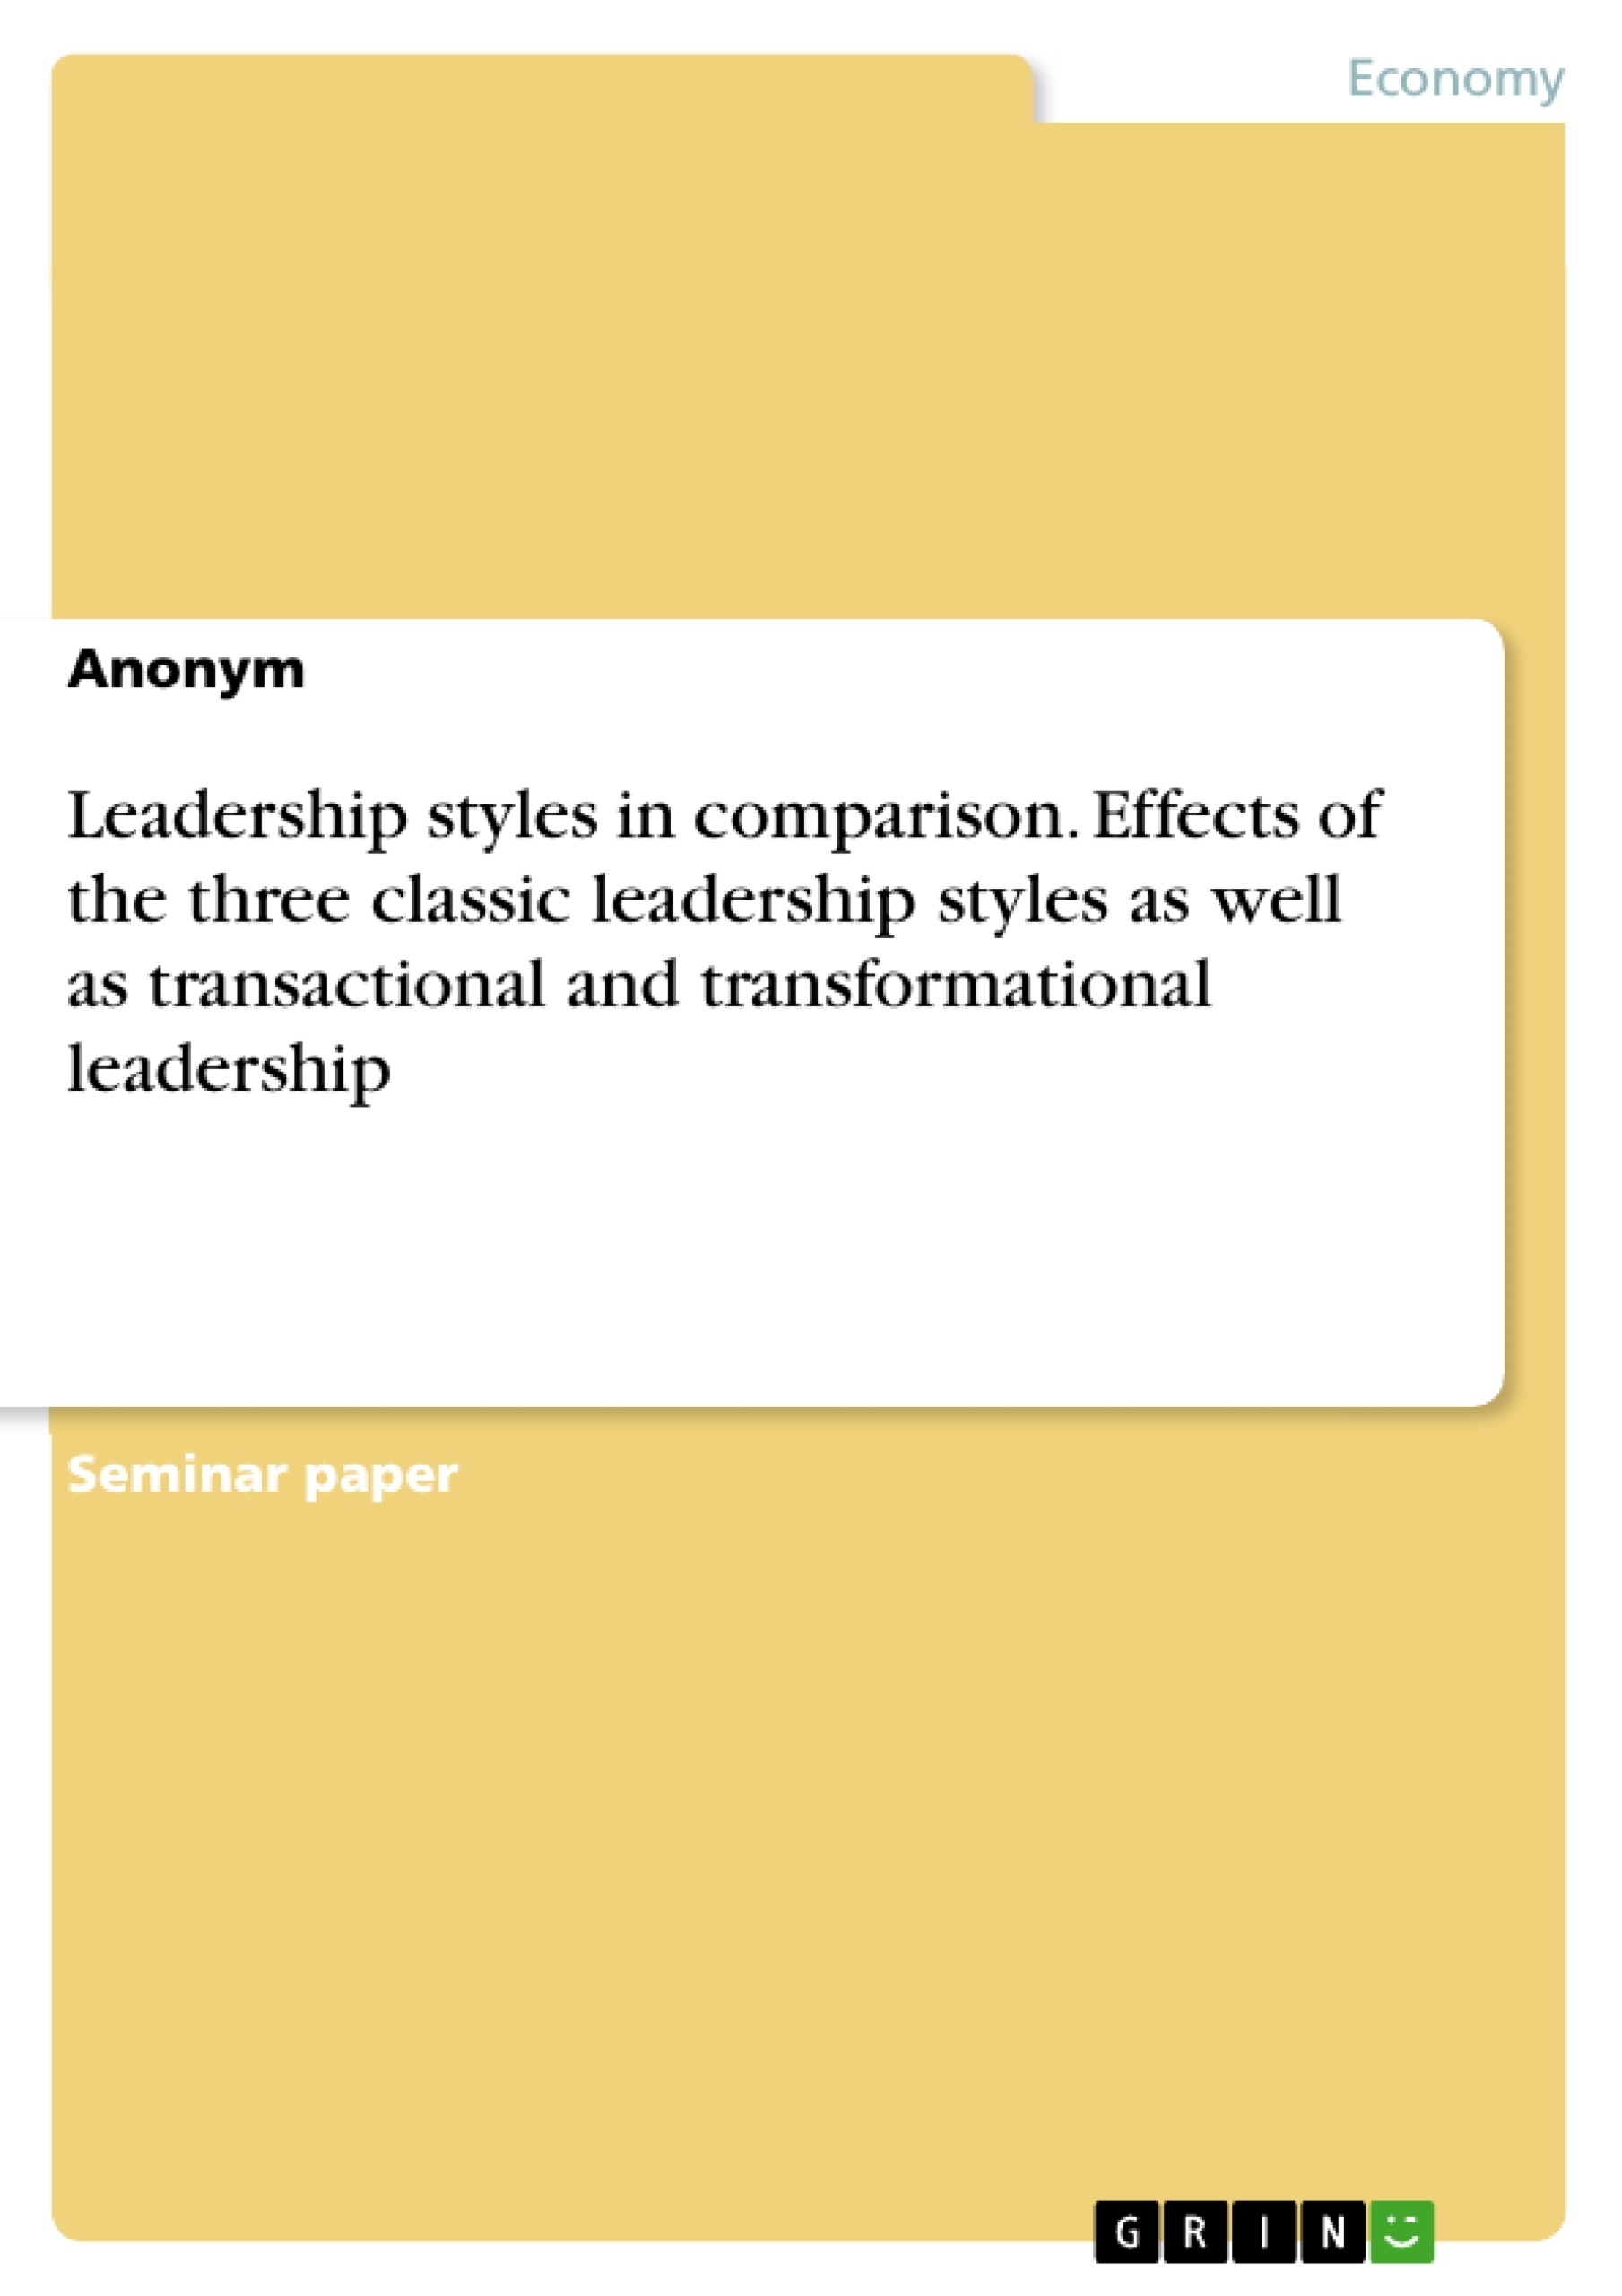 Title: Leadership styles in comparison. Effects of the three classic leadership styles as well as transactional and transformational leadership